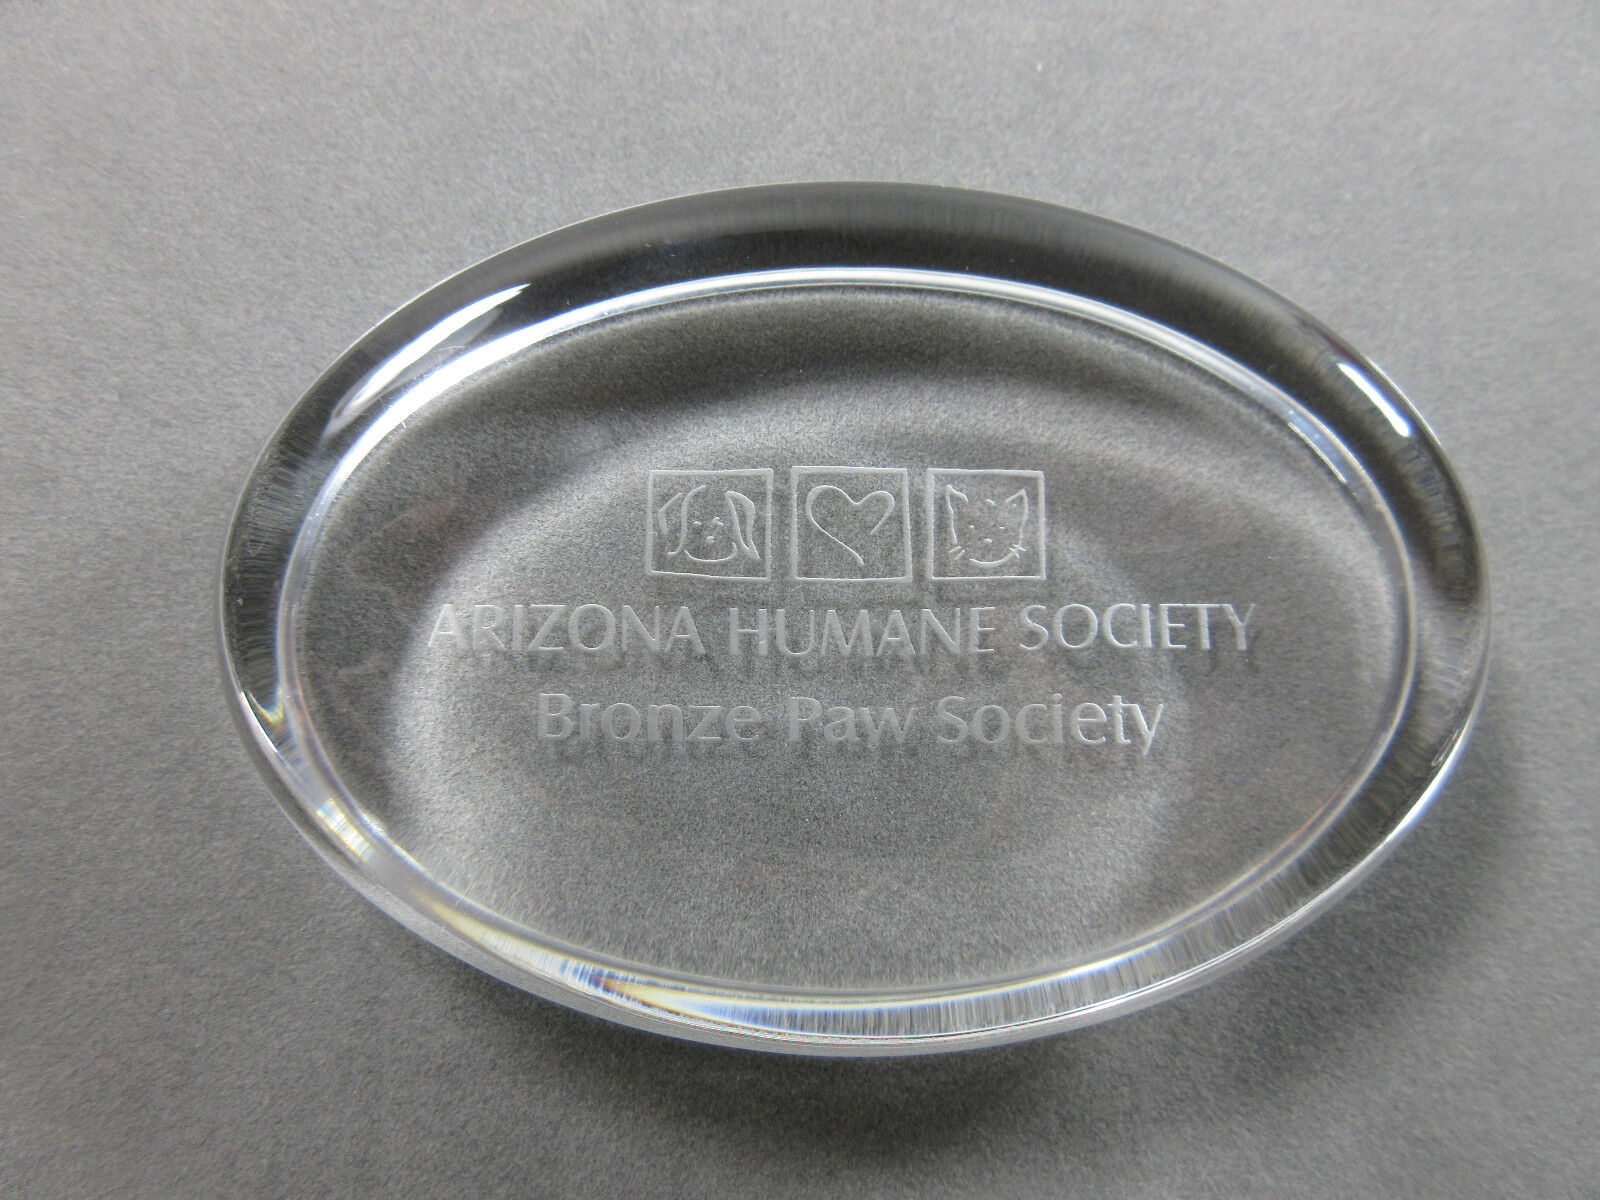 Arizona Humane Society Paperweight Bronze Paws Society Oval Clear Glass Etched